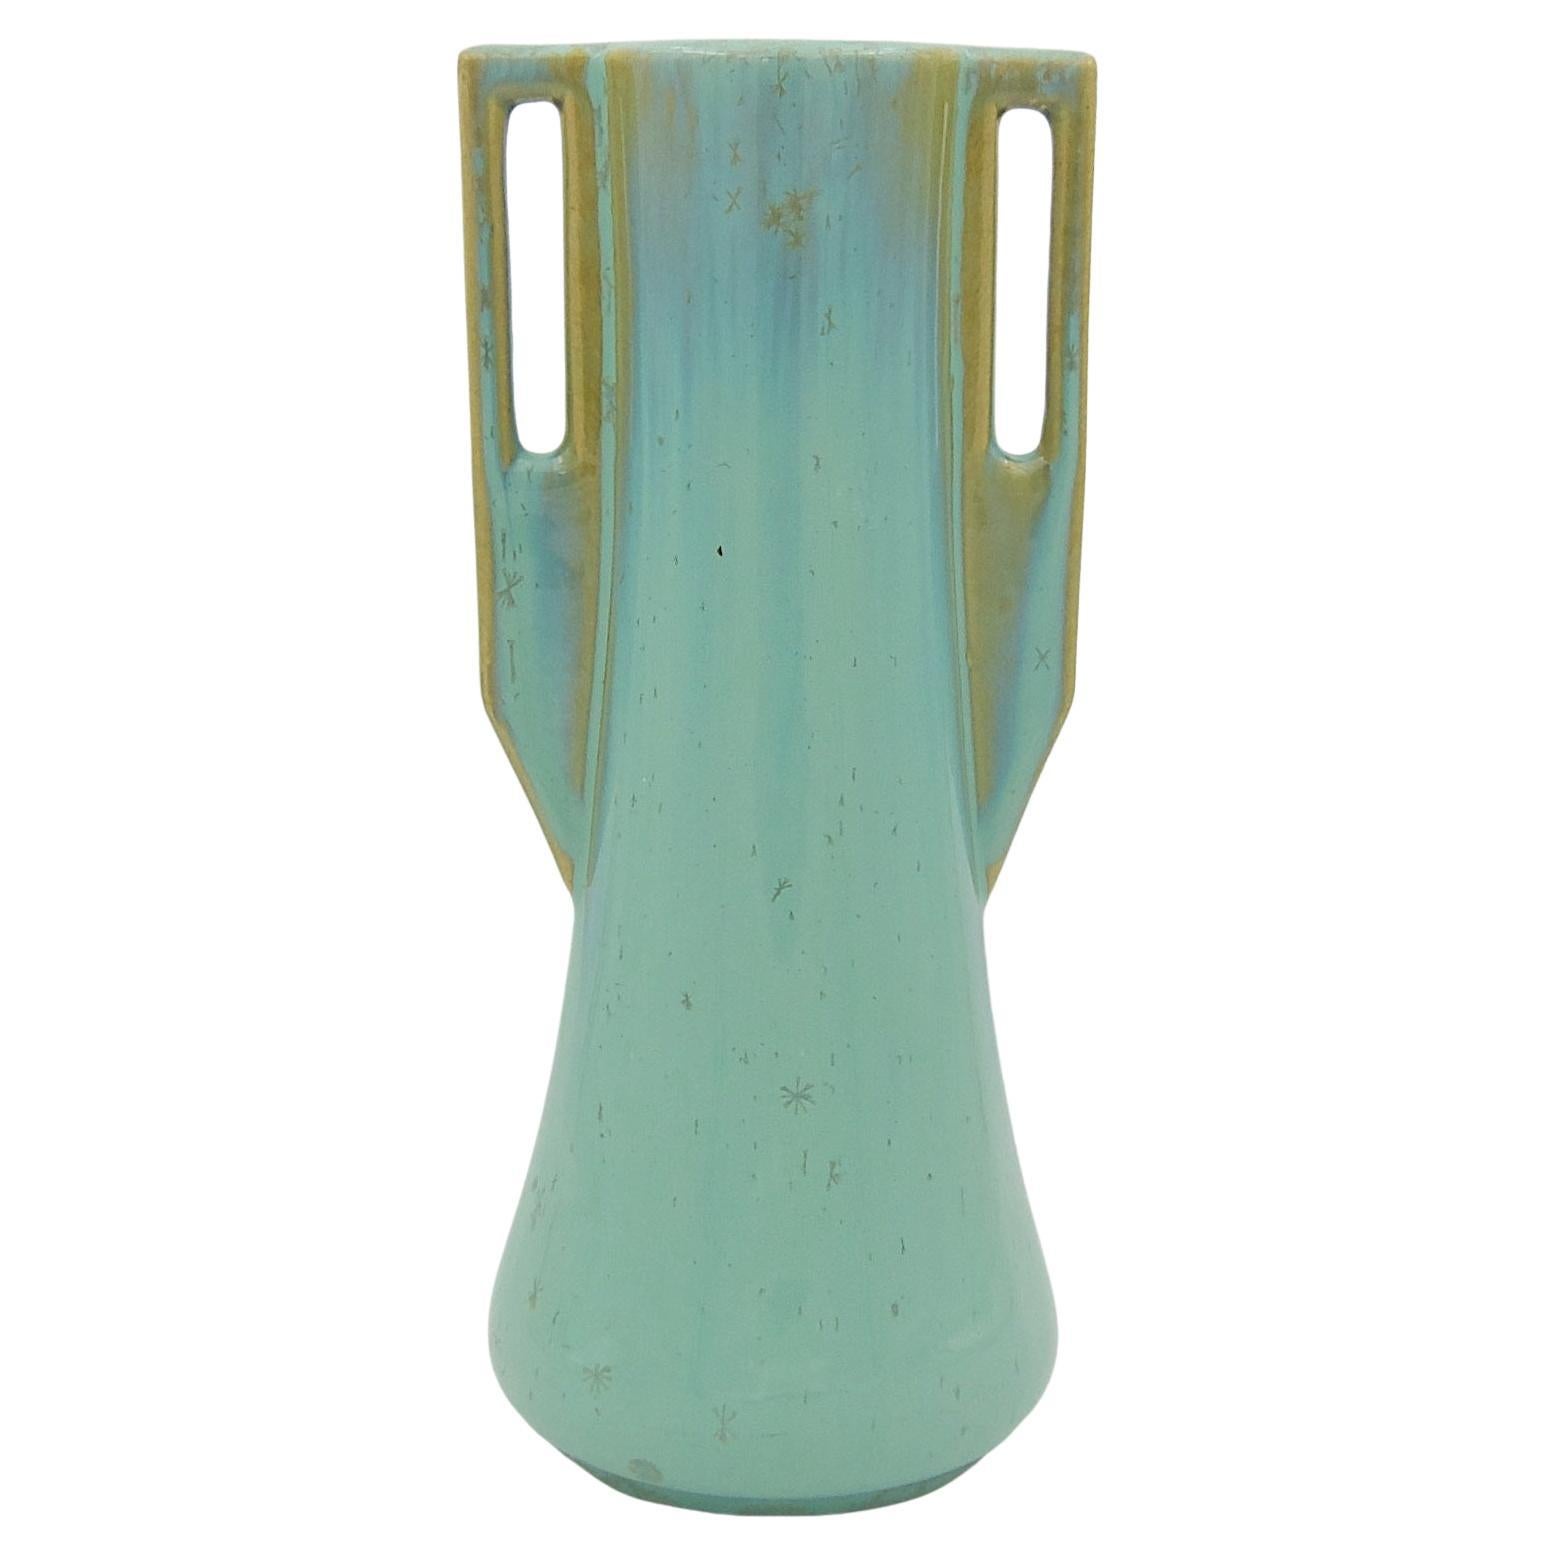 Early 20th Century Fulper Pottery Double Handle Vase with a Green Flambe Glaze